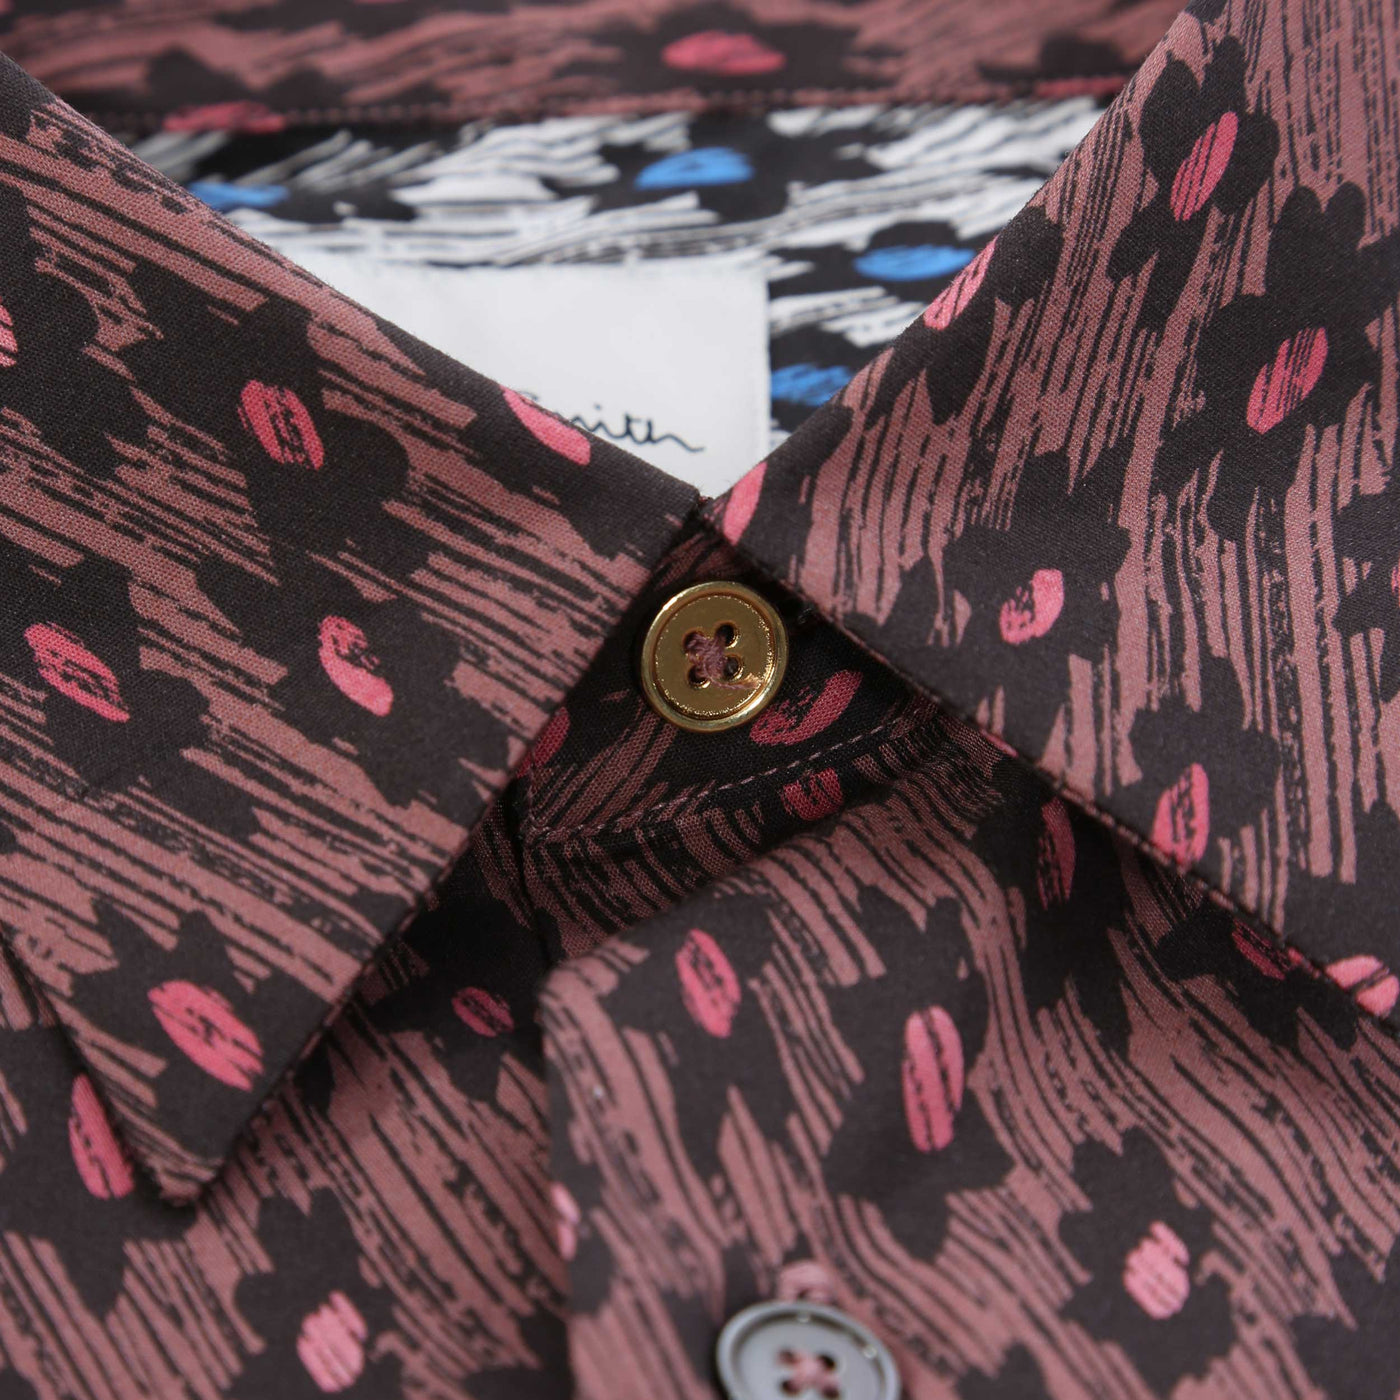 Paul Smith Flower Print Shirt in Mauve Gold Top Button